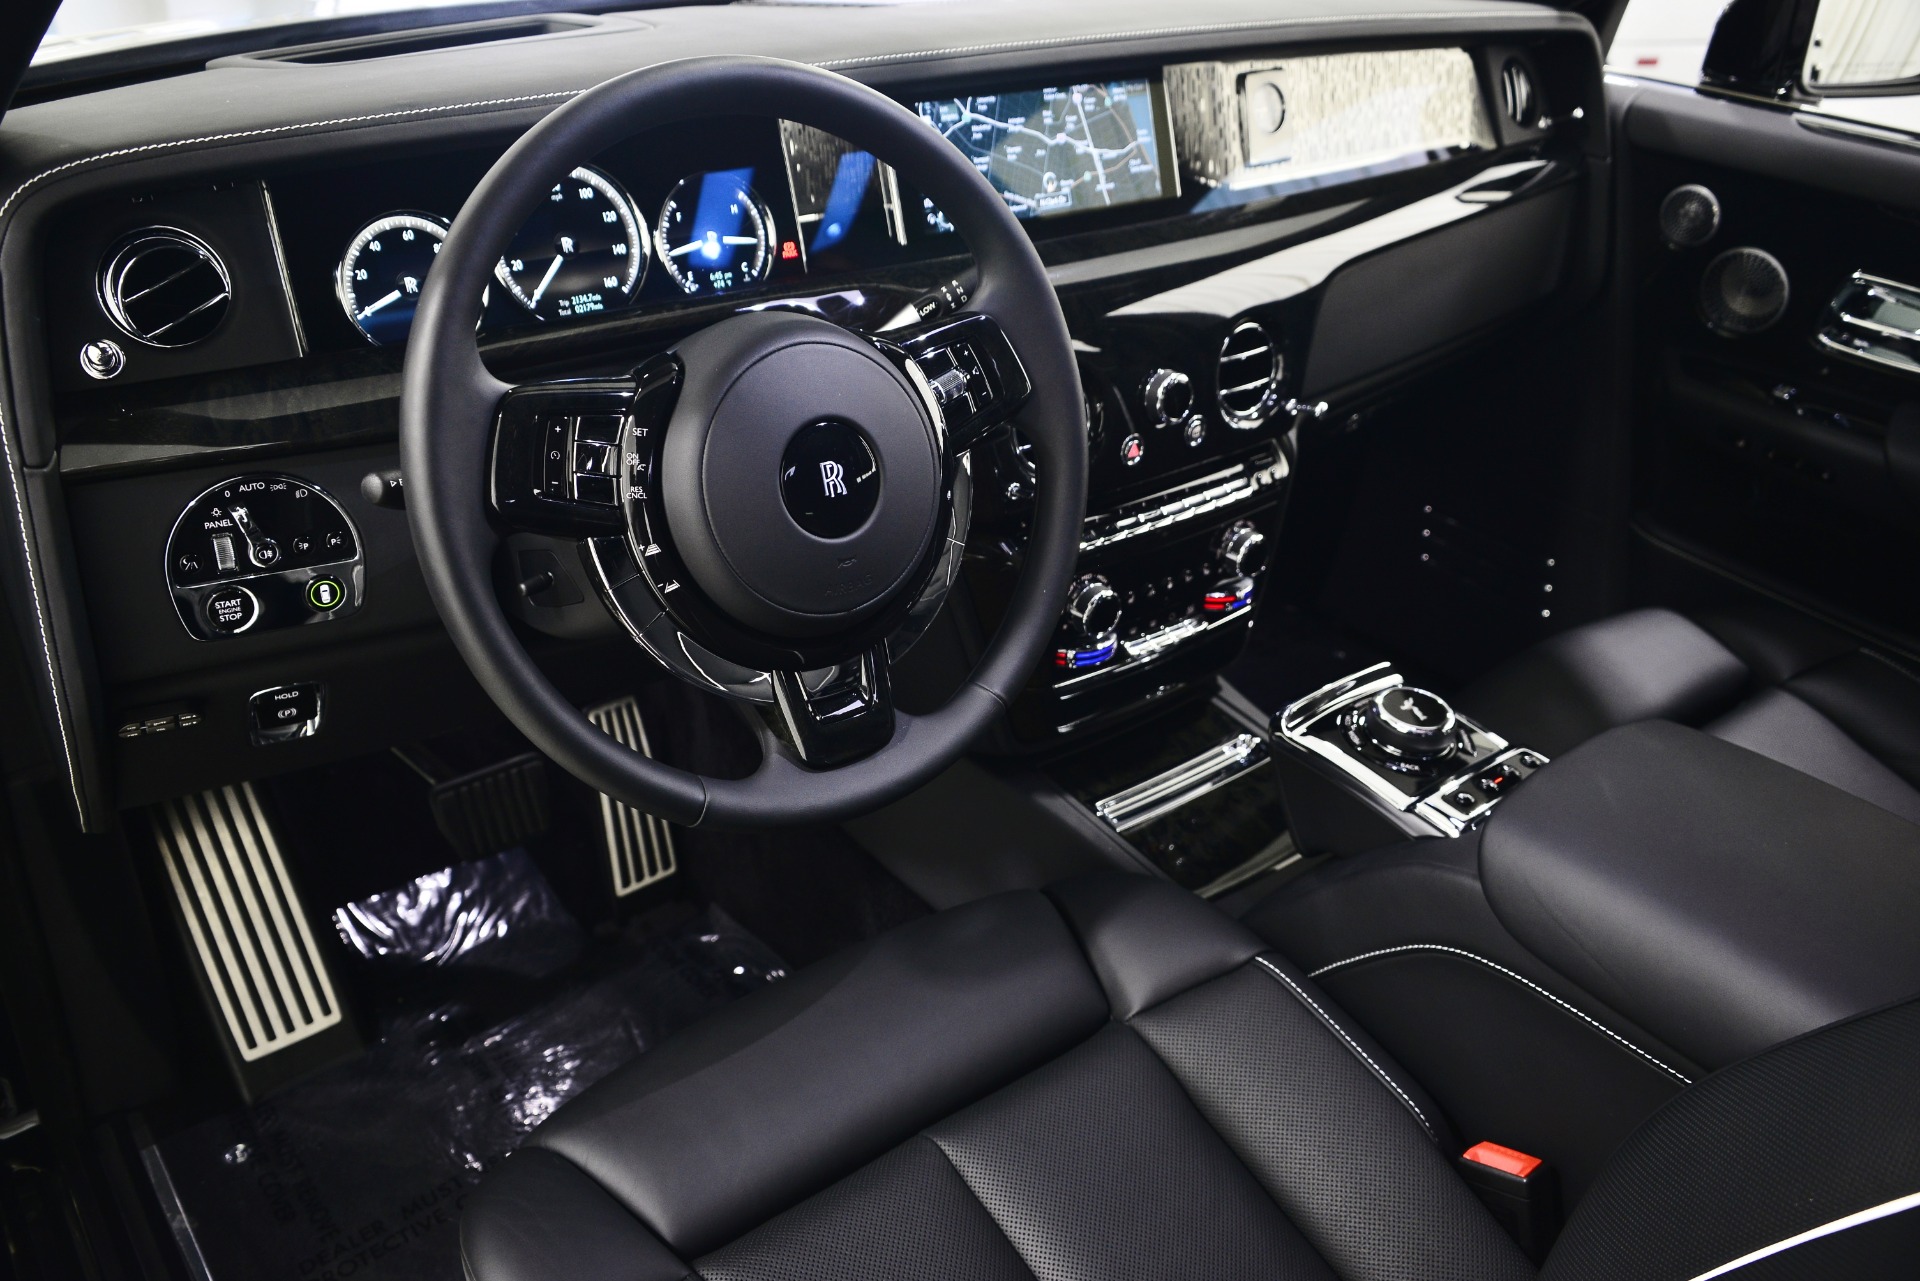 Interior View of New a Very Expensive Rolls Royce Phantom Car a Long Black  Limousine with Dashboard Steering Wheel Seats on Editorial Photography   Image of germany classic 144870657